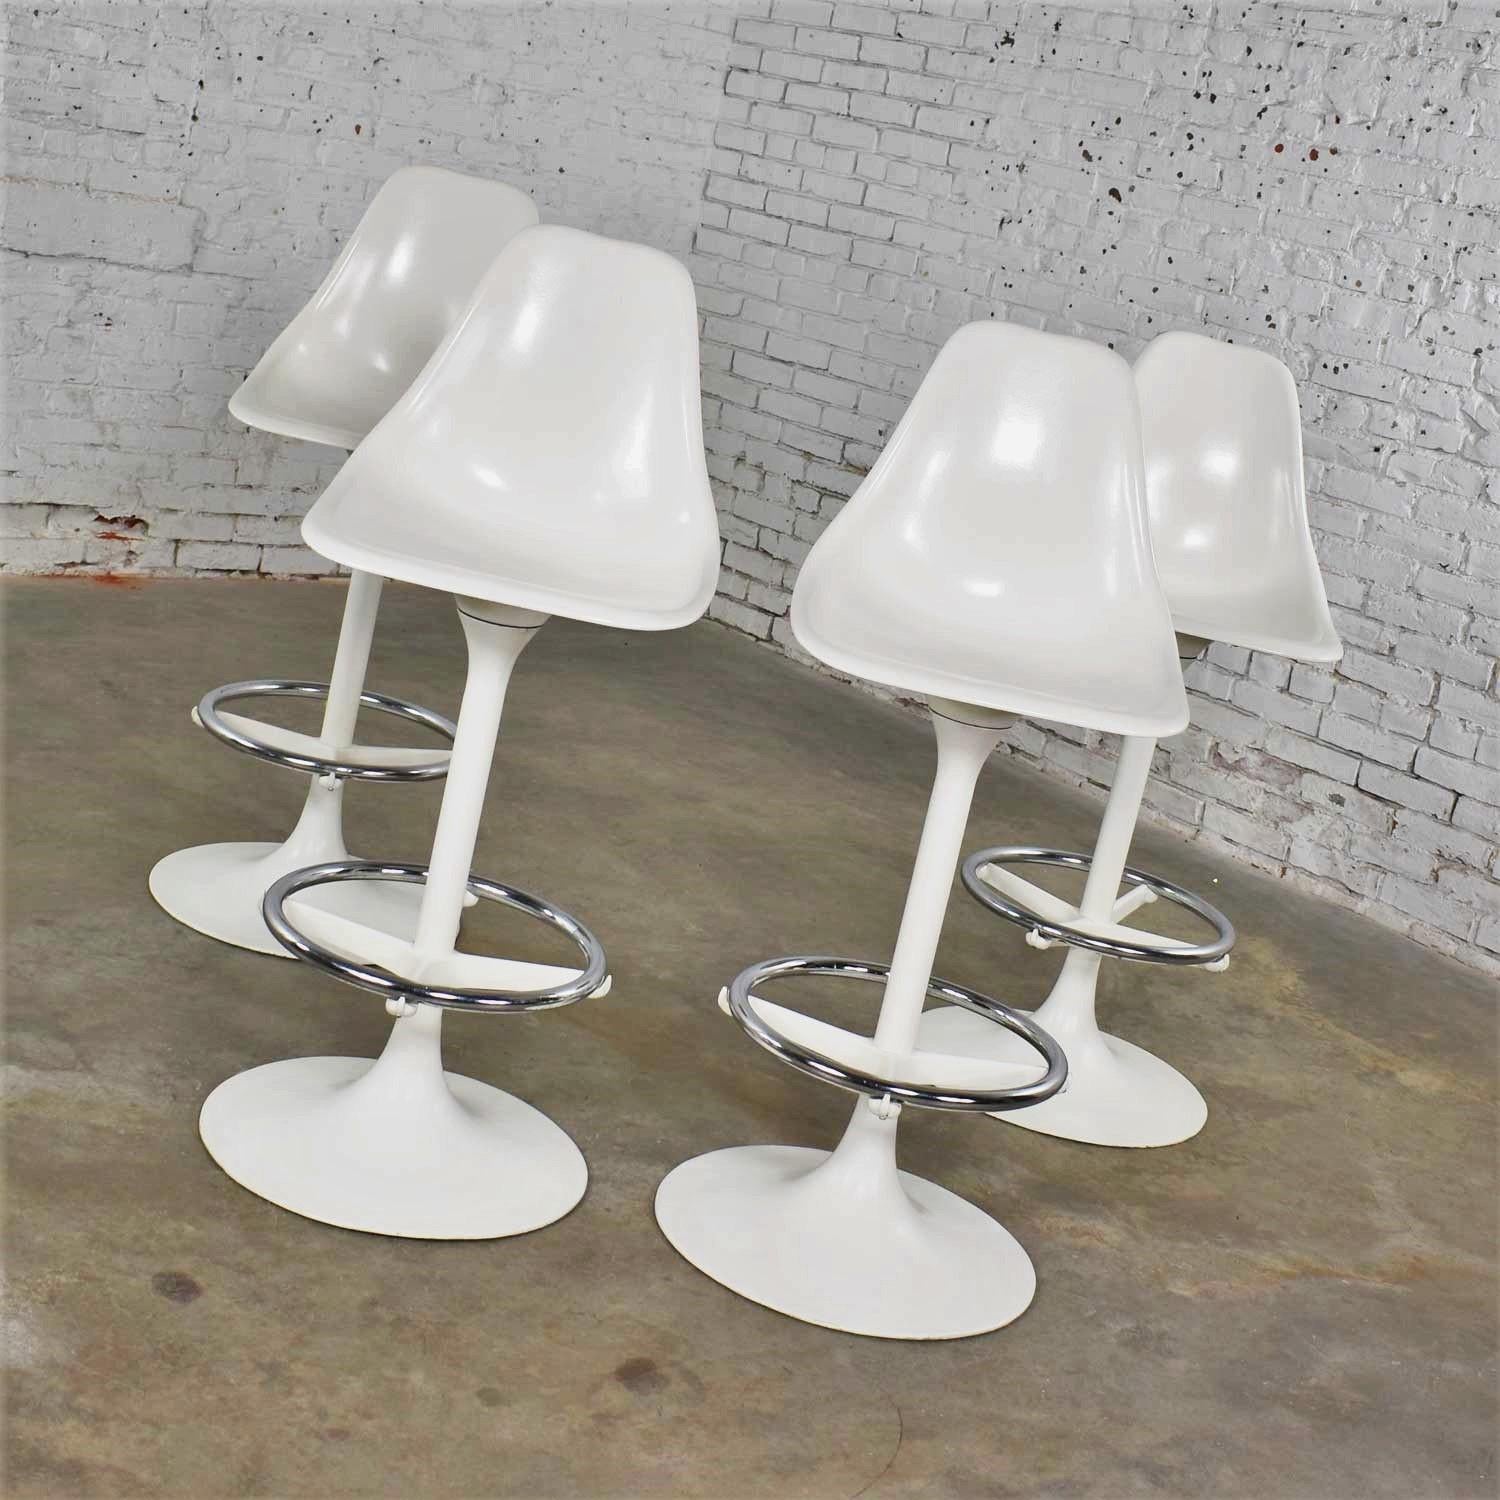 Handsome set of four tulip style white fiberglass and cast aluminum swivel barstools designed by Arthur Umanoff for Contemporary shells. These are bar height stools with a 30-inch seat height. They are in wonderful vintage condition. We believe the